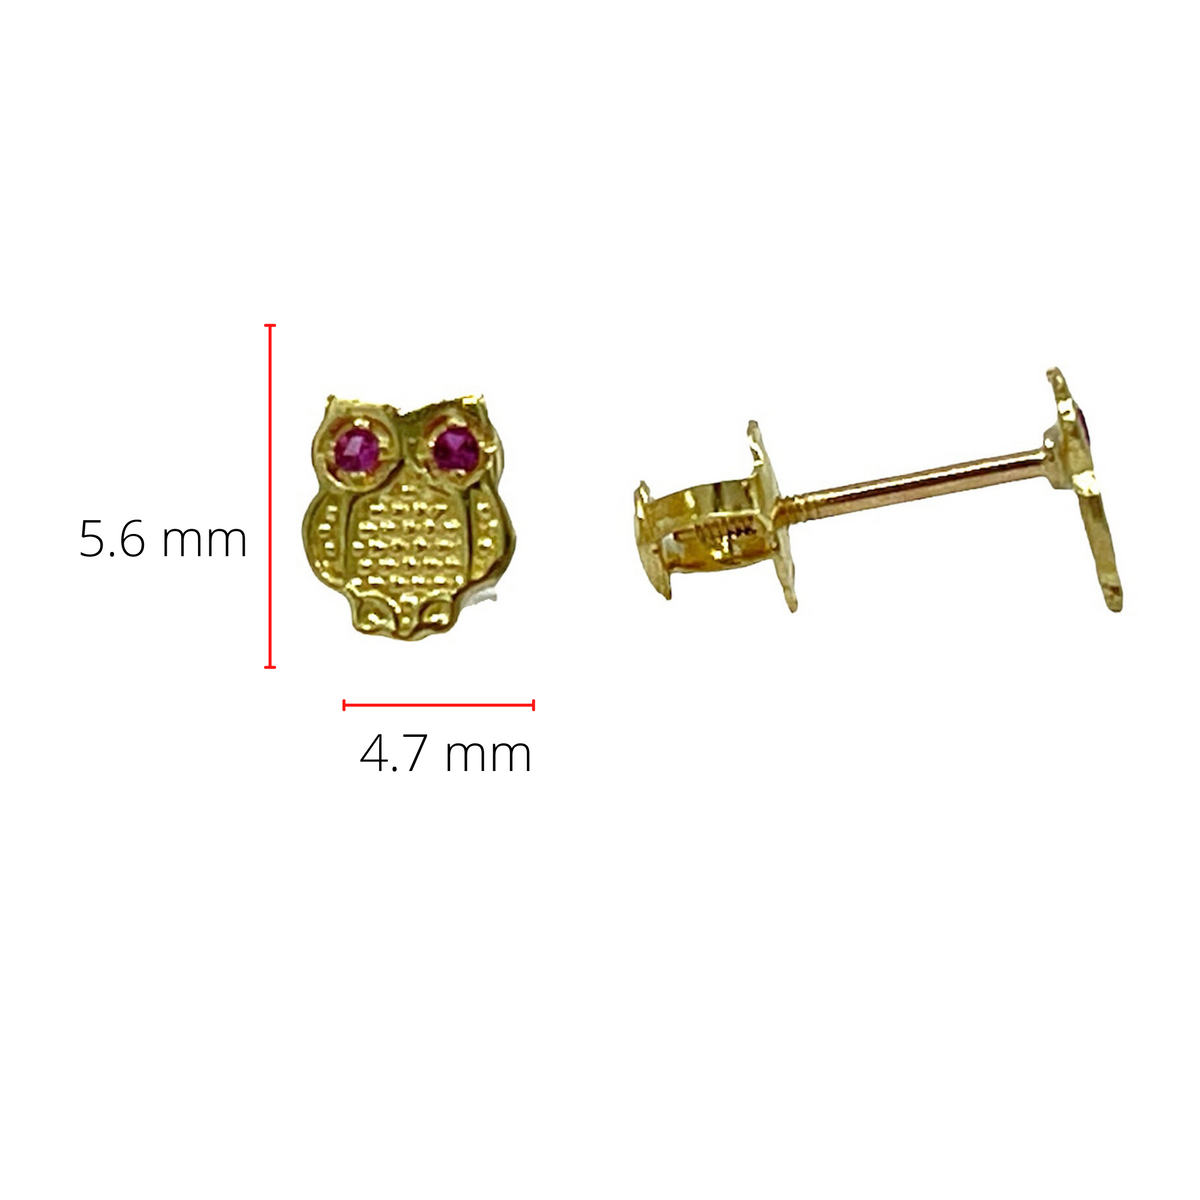 10K Yellow Gold Pink Cubic Zirconia Owl Stud Earrings with Screw Backs - 5.6 x 4.7mm